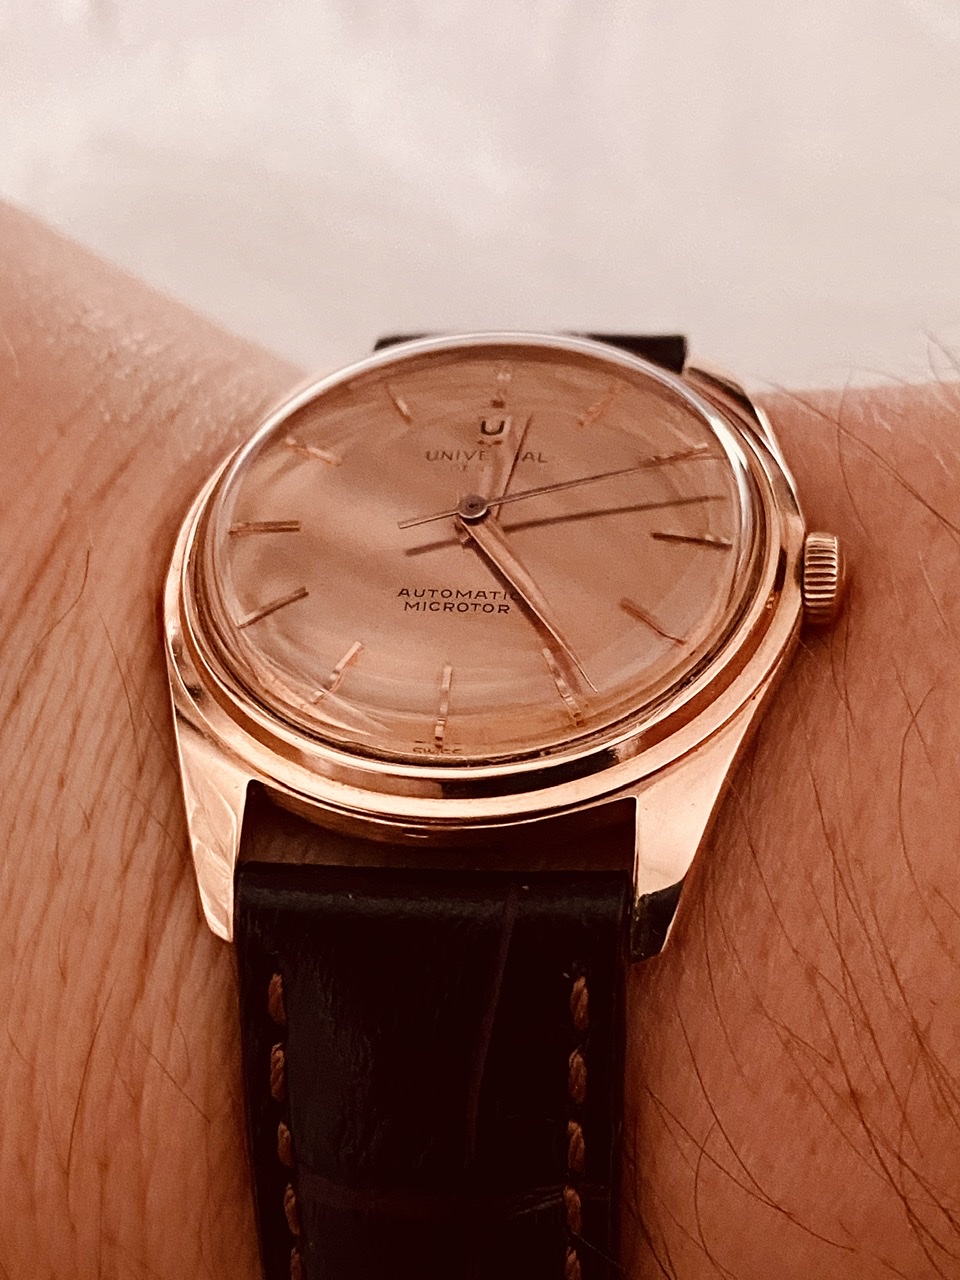 Universal Geneve Microtor Automatic